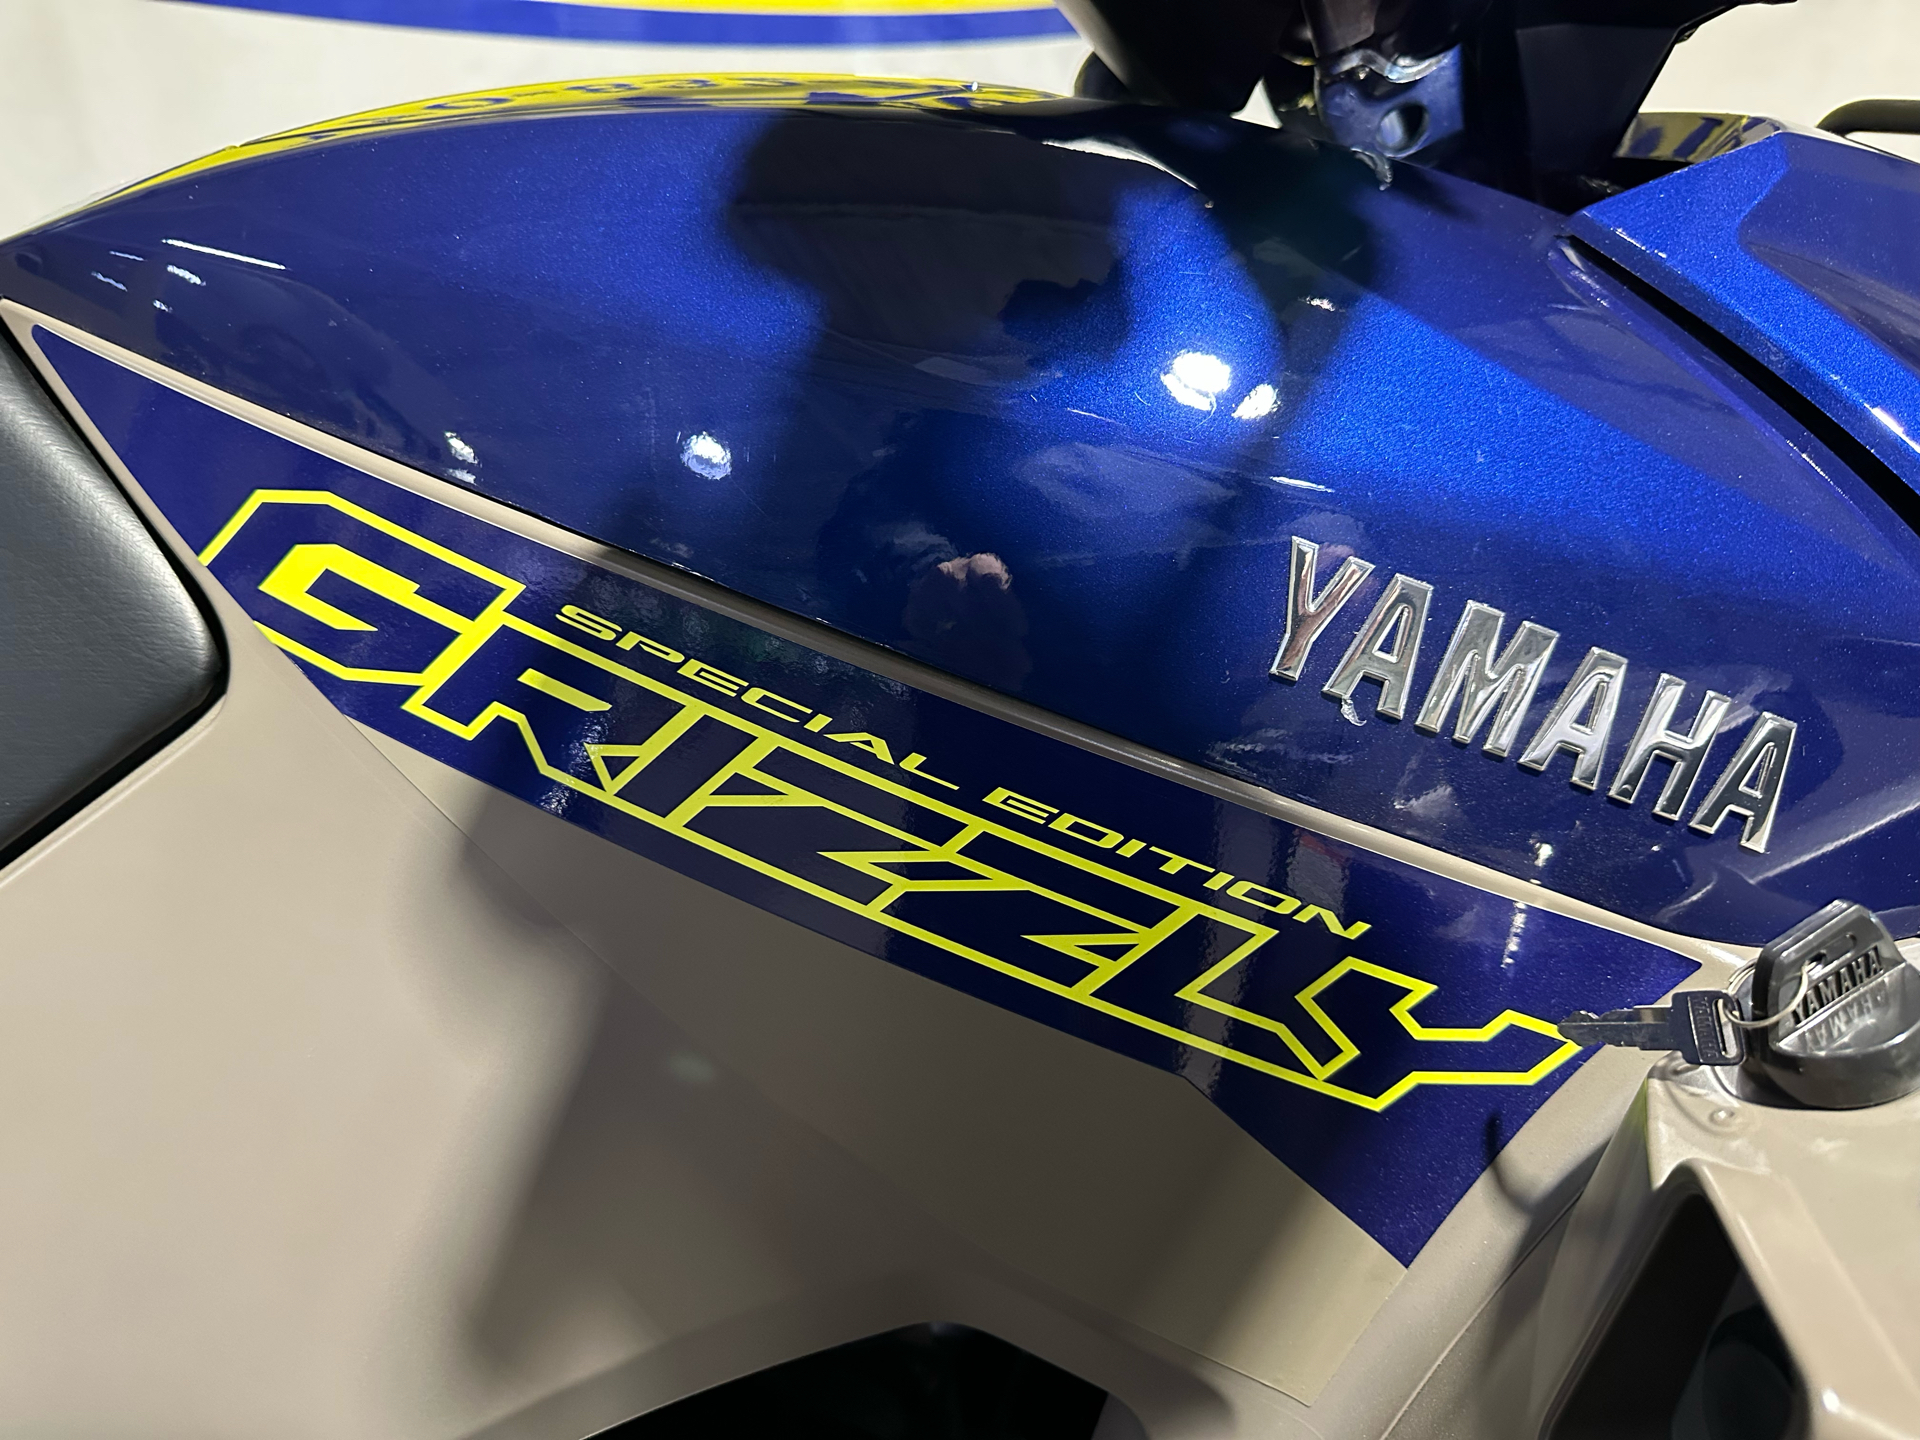 2023 Yamaha Grizzly EPS SE in Roopville, Georgia - Photo 4